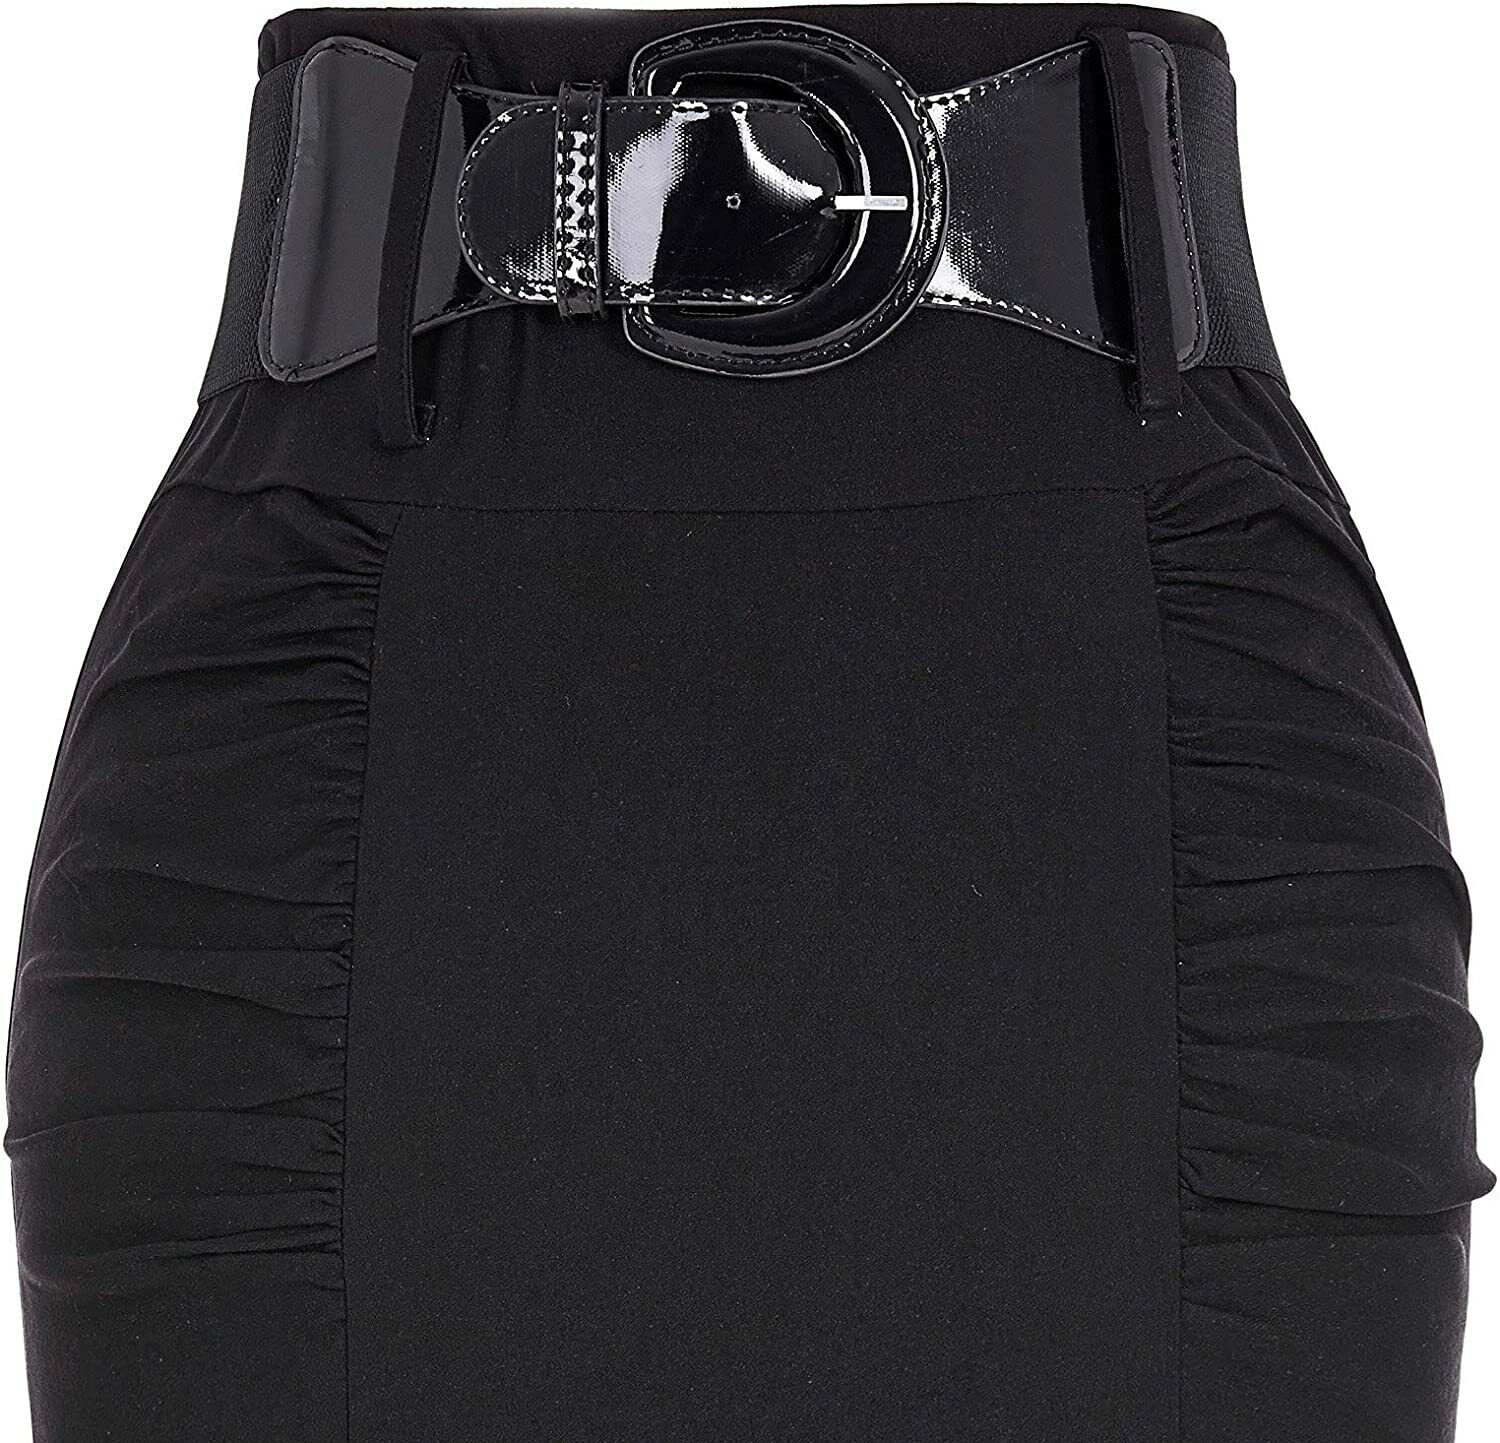 Women's Stretchy Pencil Skirt Side Pleated Business Skirts with Belt  KK271(28 Co | eBay